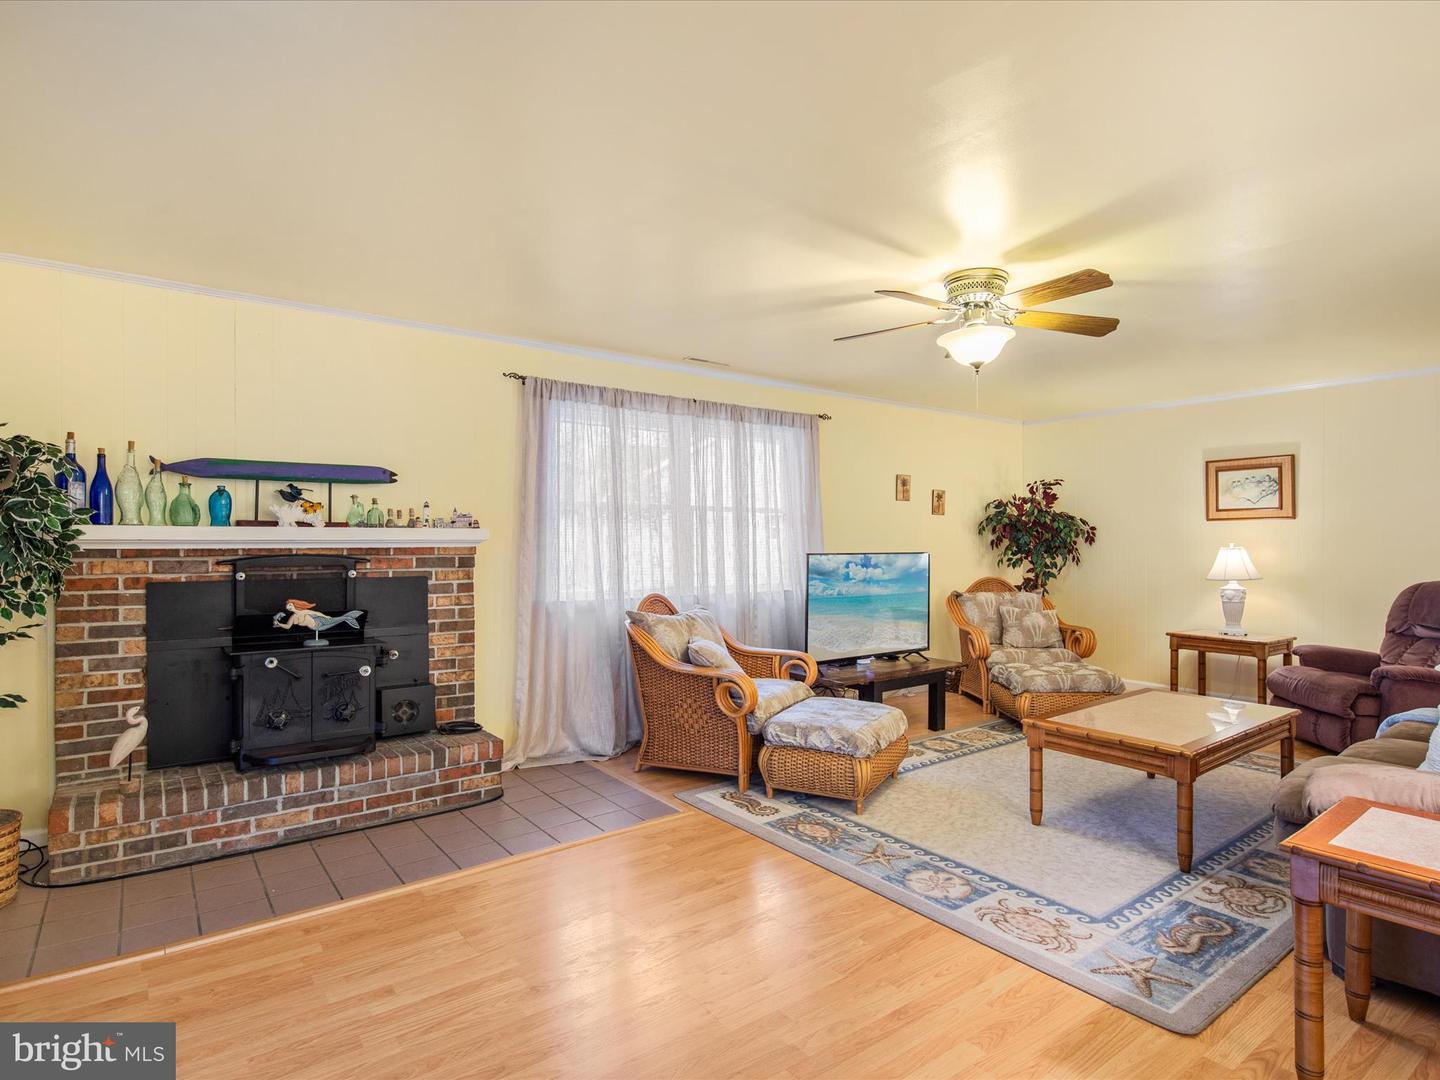 MDWO2019272-802894944912-2024-03-01-08-17-38 20 Southwind Ct | Berlin, MD Real Estate For Sale | MLS# Mdwo2019272  - 1st Choice Properties